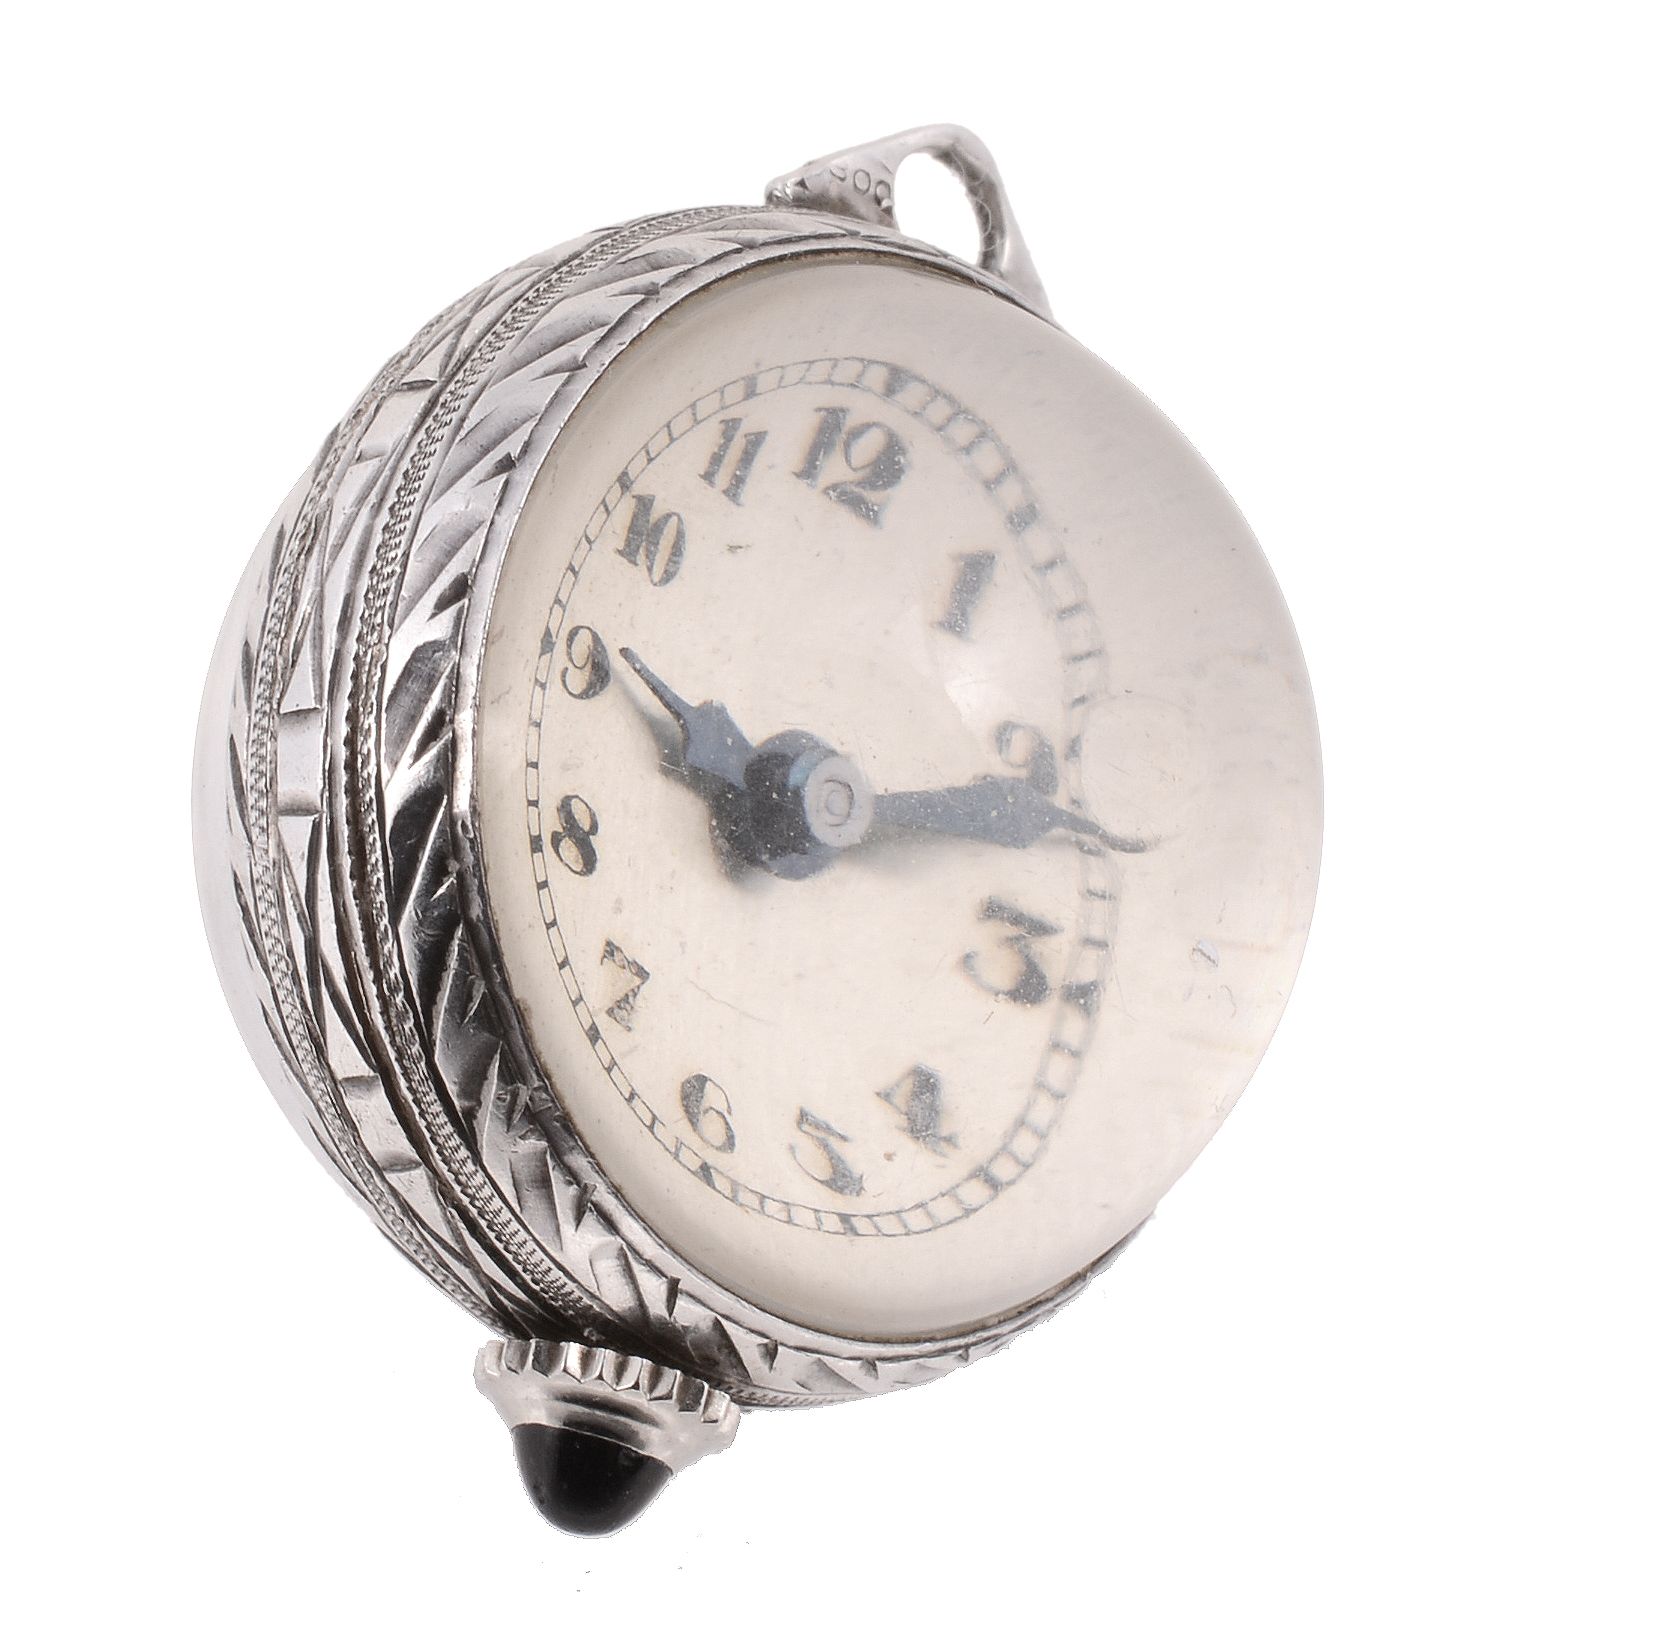 A silver coloured pendant ball watch, .800 standard, manual wind lever movement, 15 jewels, - Image 4 of 4